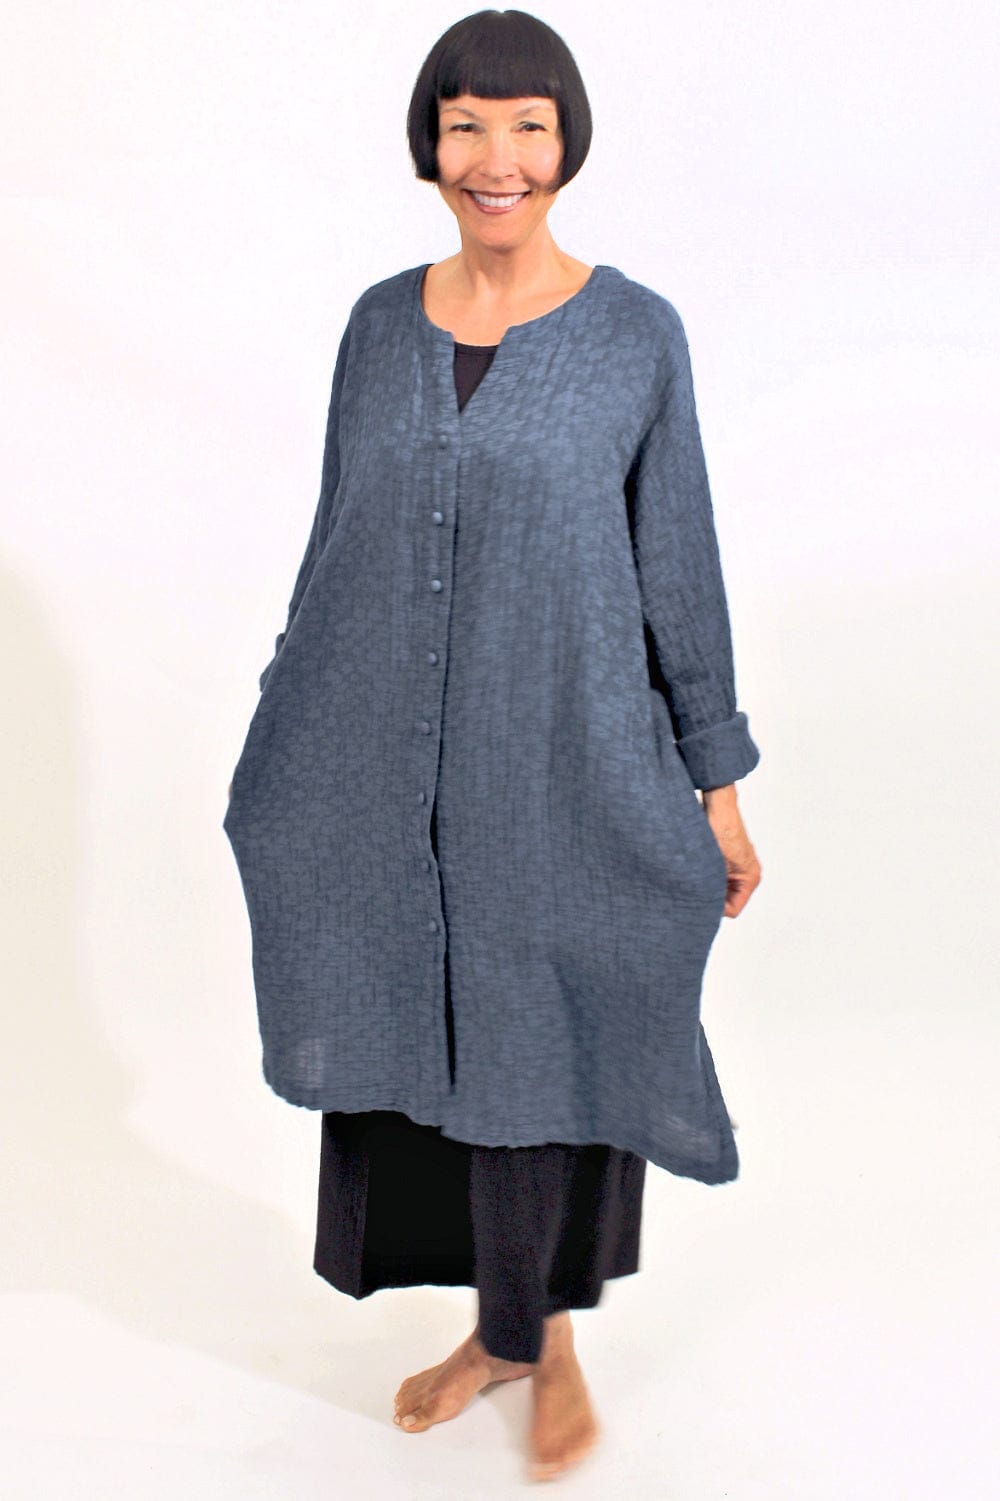 Women's blue long textured linen jacket with fabric covered front buttons and side pockets.